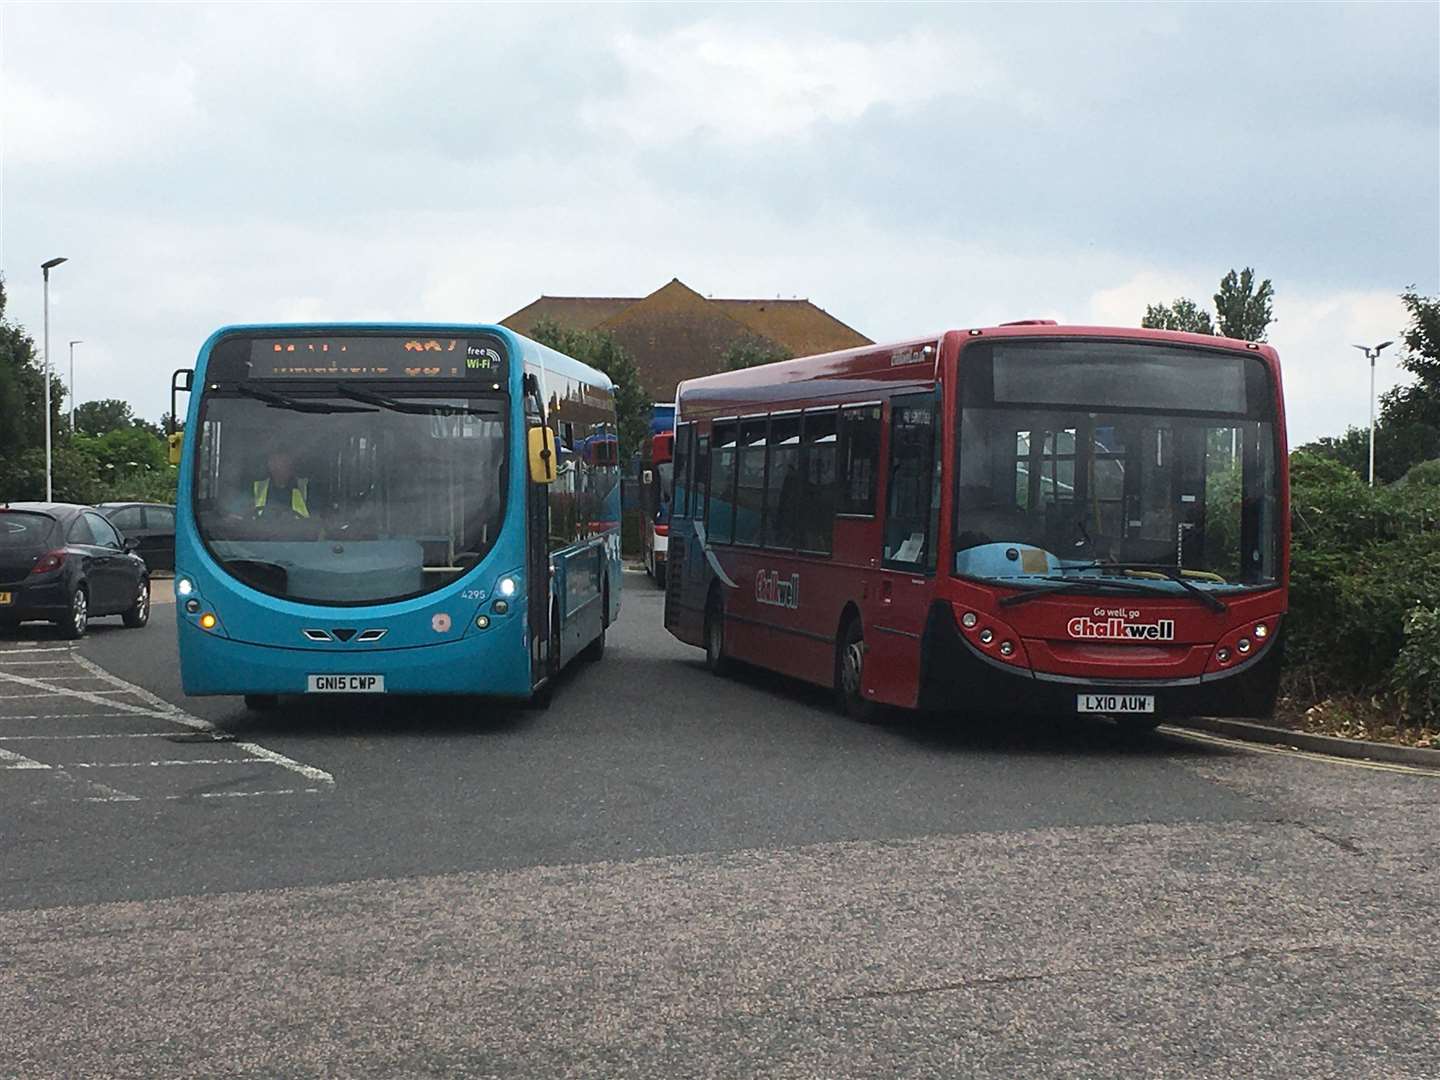 Chalkwell is taking over some of Arriva's routes